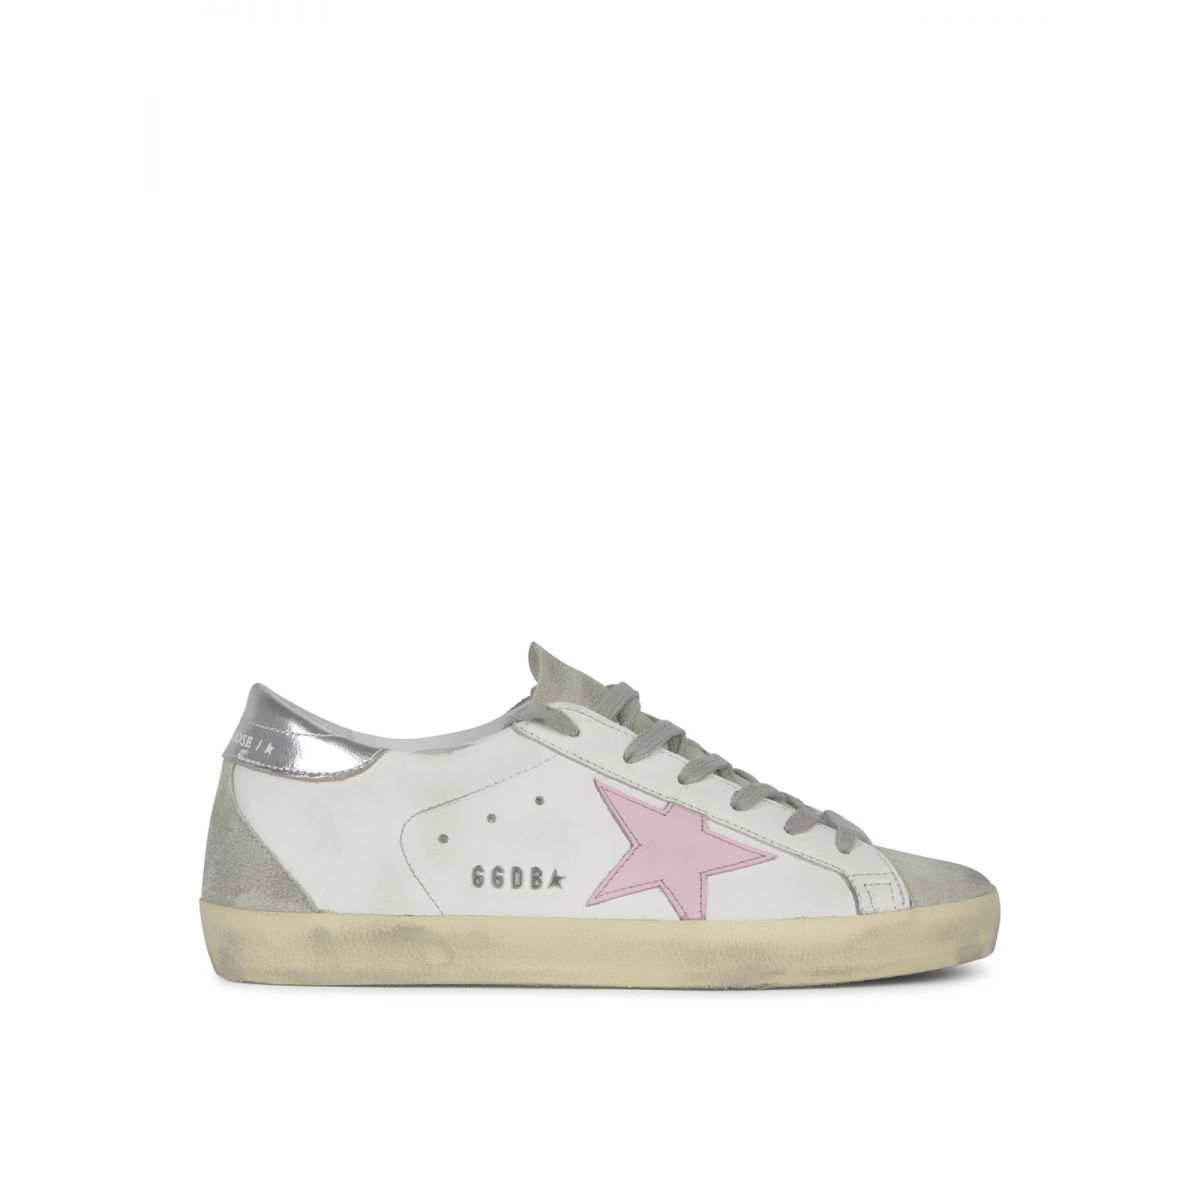 GOLDEN GOOSE - Low sneakers with star patch